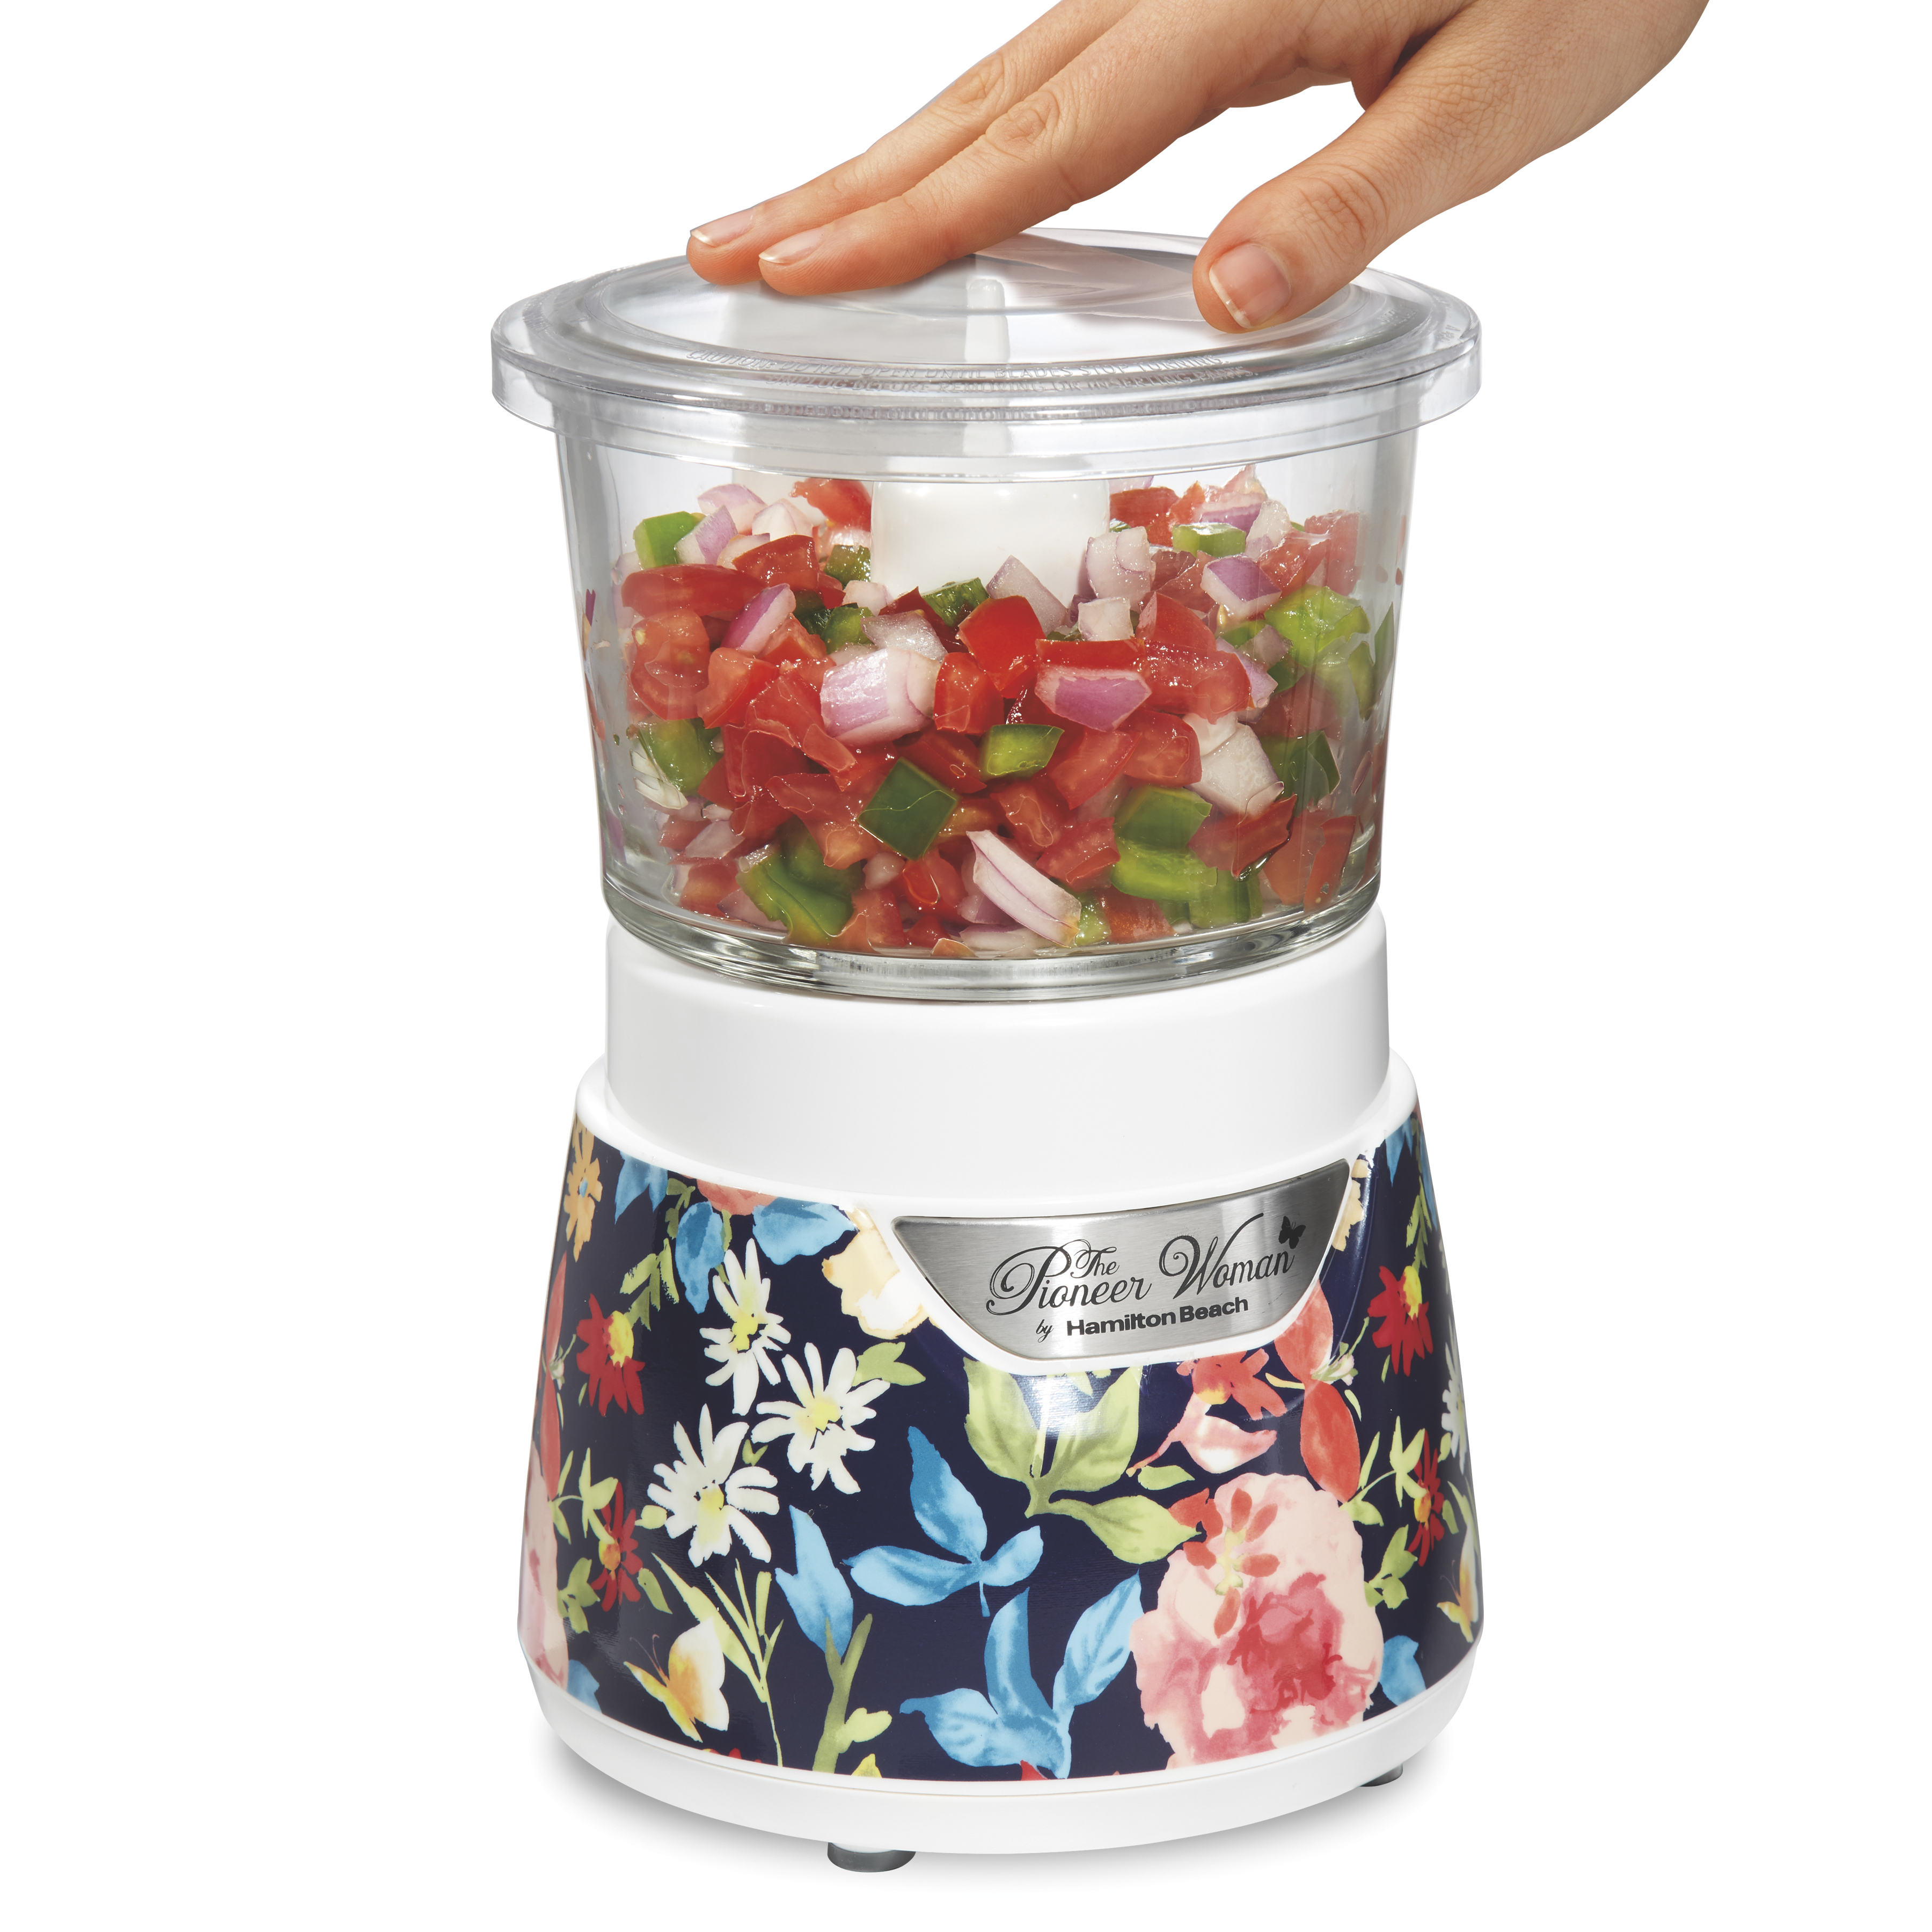 The Pioneer Woman Fiona Floral Stack & Press Glass Bowl Food Chopper, 3 Cup Capacity - image 5 of 5